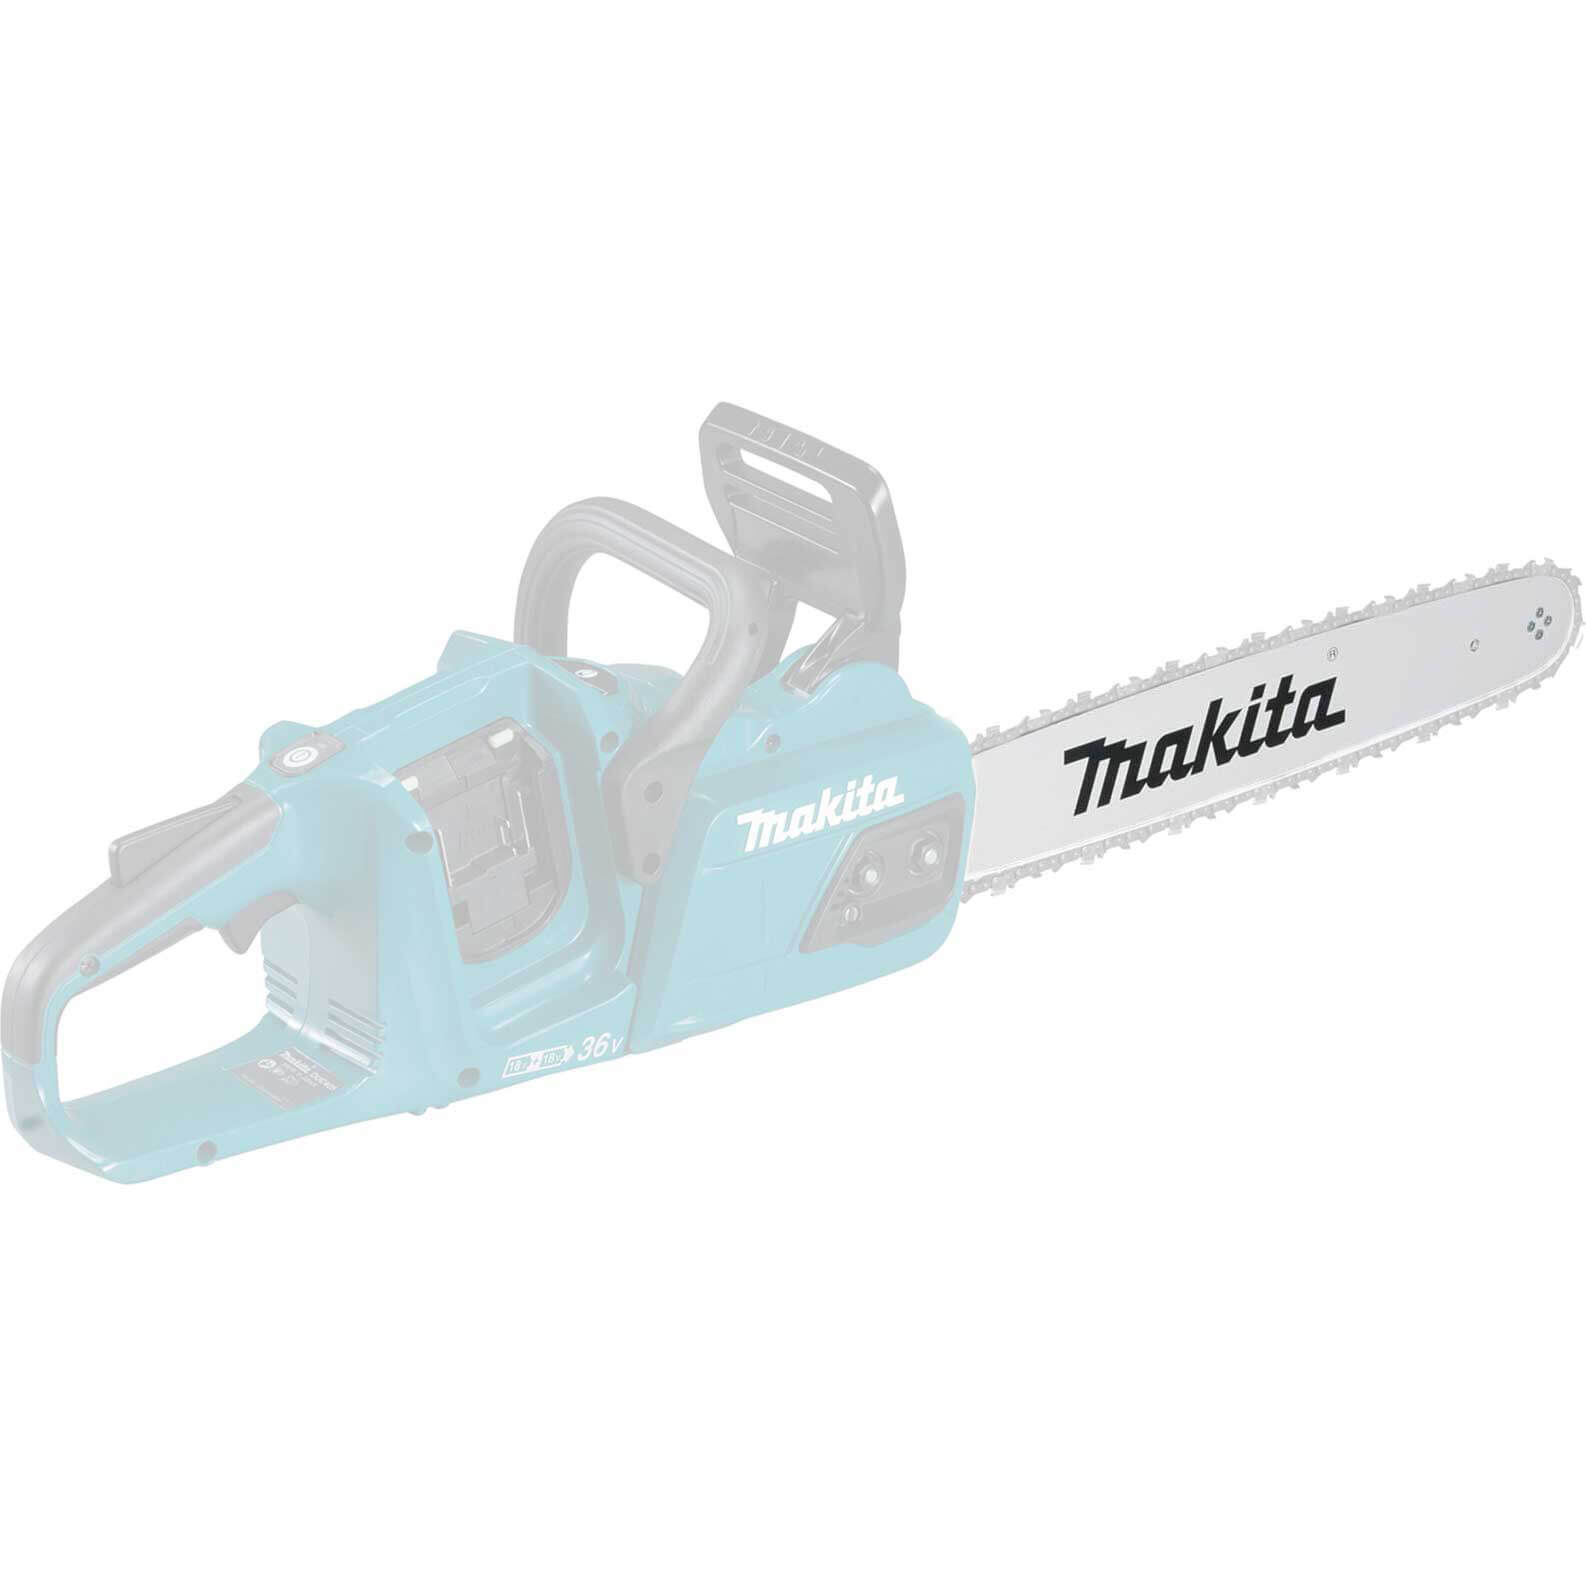 Photo of Makita Replacement Bar For Makita Chainsaw Duc405